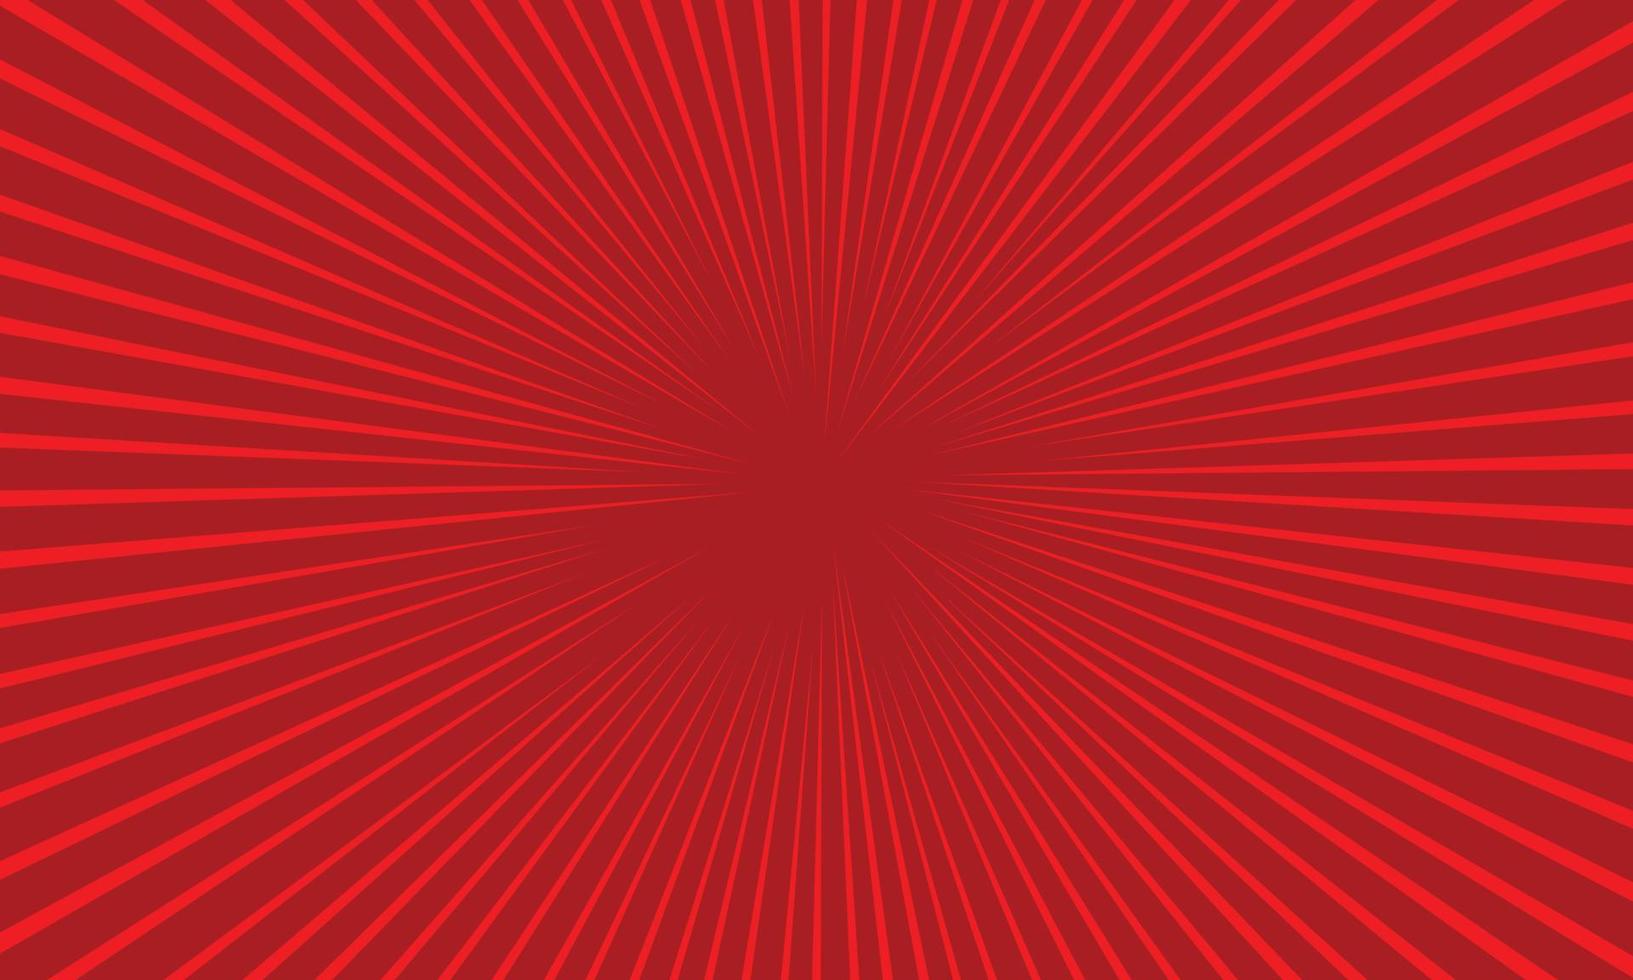 Abstract Radial Zoom Effect Background vector